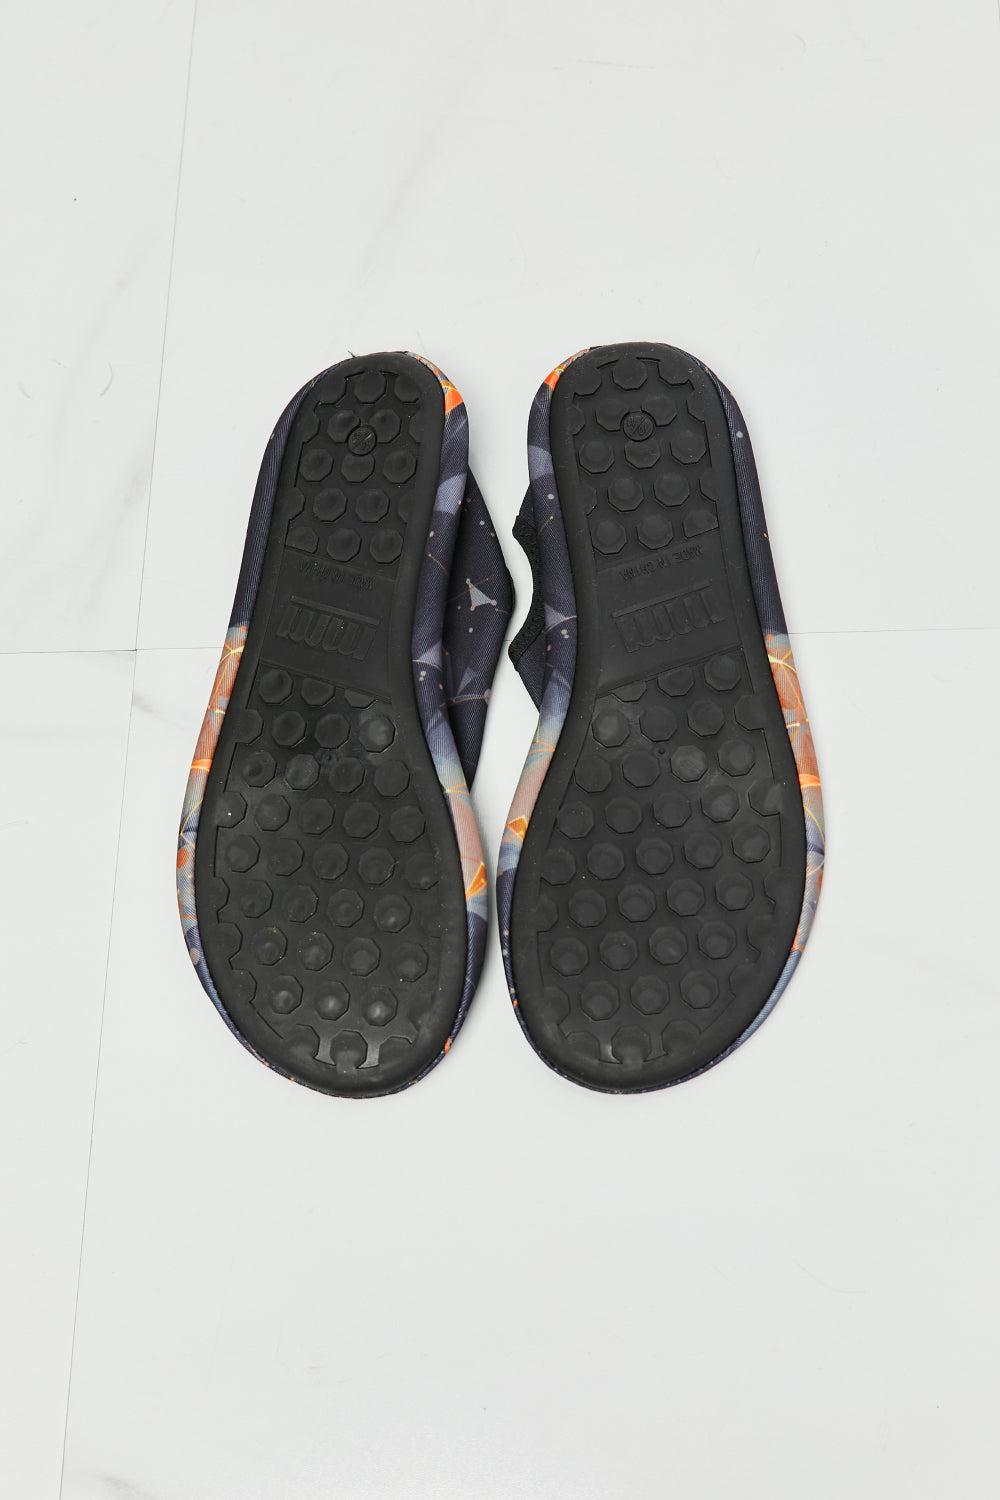 MMshoes On The Shore Water Shoes in Black/Orange BLUE ZONE PLANET